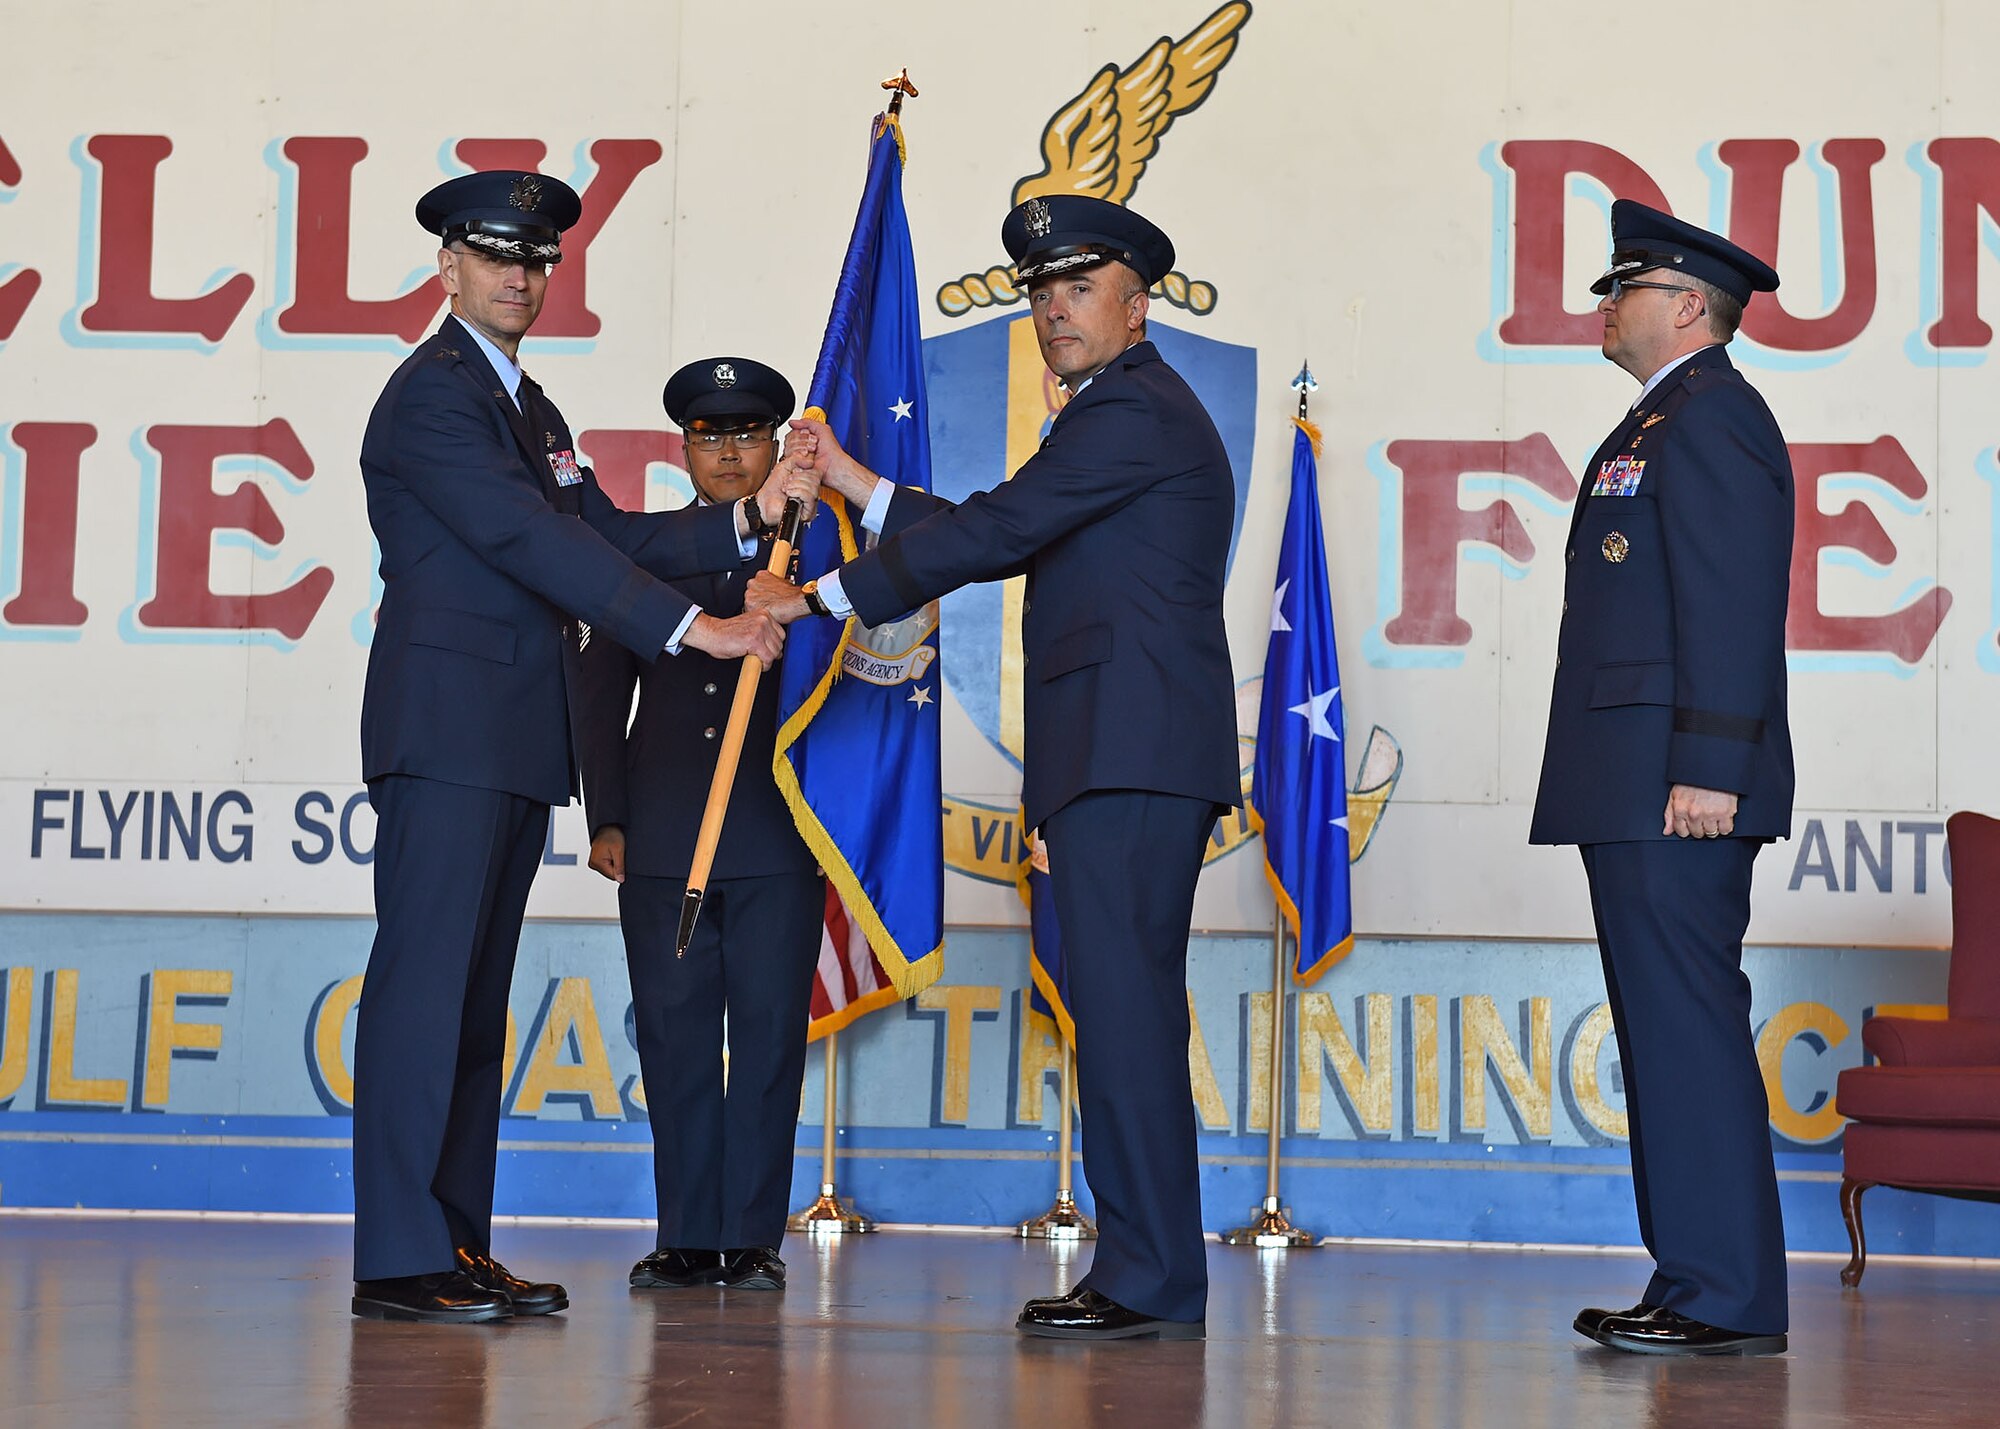 Lt. Gen. Mark A. Ediger (left), Surgeon General of the Air Force, passes the Air Force Medical Operations Agency guidon to Brig. Gen. Robert I. Miller (center), incoming AFMOA commander, during a change of command ceremony at Port San Antonio, May 6. In military tradition, the passing of a unit’s guidon signifies relinquishing or accepting command of that unit. (U.S. Air Force photo / Tech. Sgt. Christopher Carwile.)